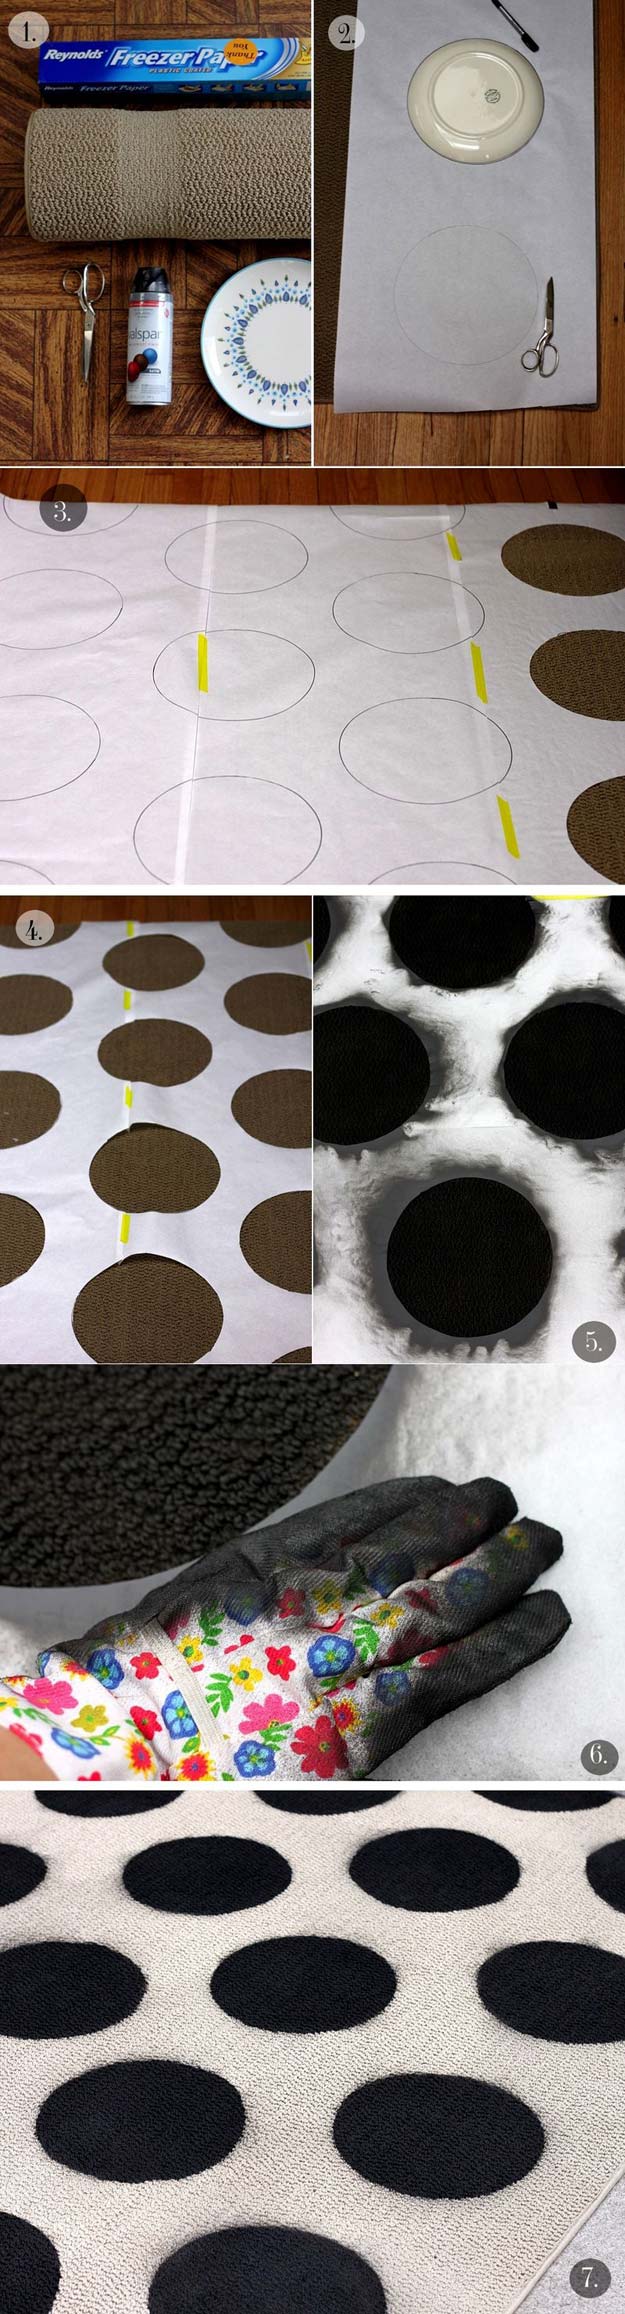 DIY Polka Dot Crafts and Projects - DIY Polka Dot Rug - Cool Clothes, Room and Home Decor, Wall Art, Mason Jars and Party Ideas, Canvas, Fabric and Paint Project Tutorials - Fun Craft Ideas for Teens, Kids and Adults Make Awesome DIY Gifts